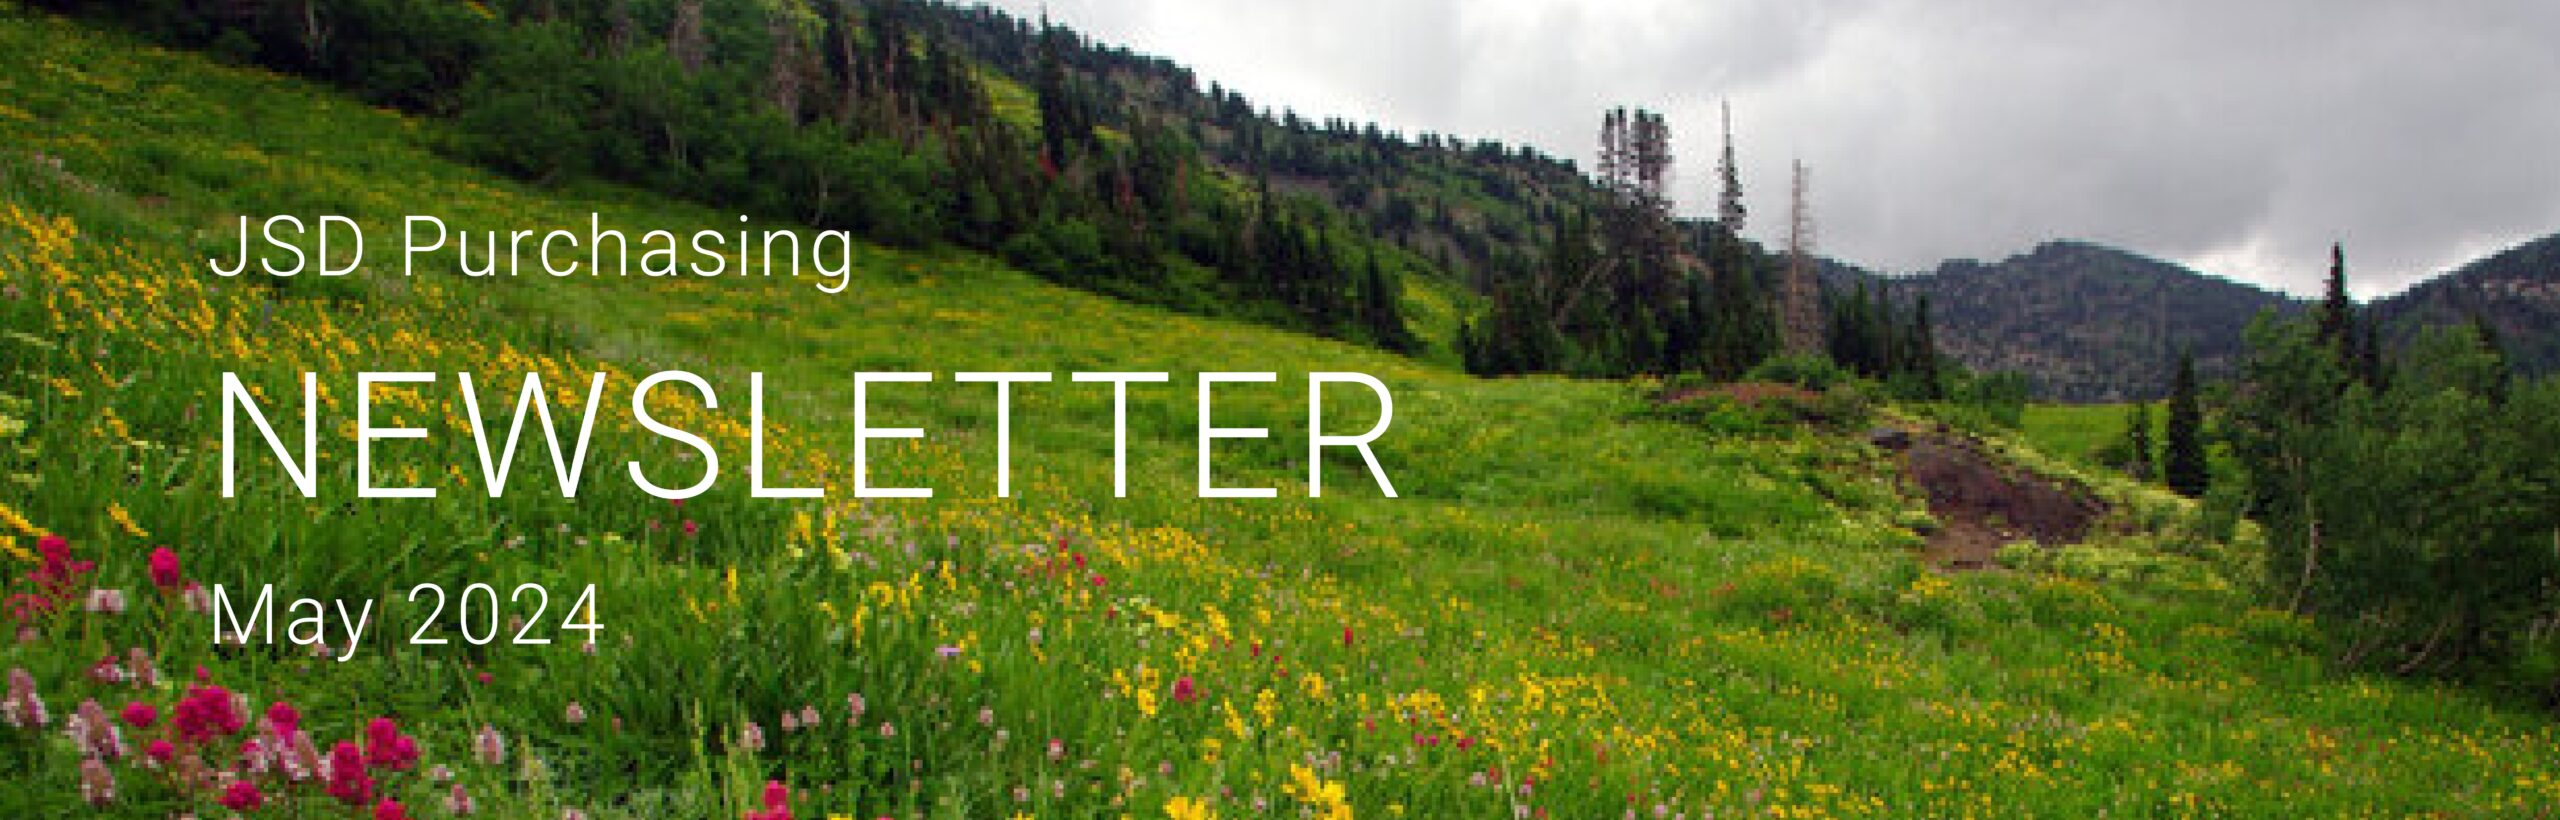 JSD Purchasing Newsletter, May 2024. Background shows a mountain meadow with flowers on a cloudy day.